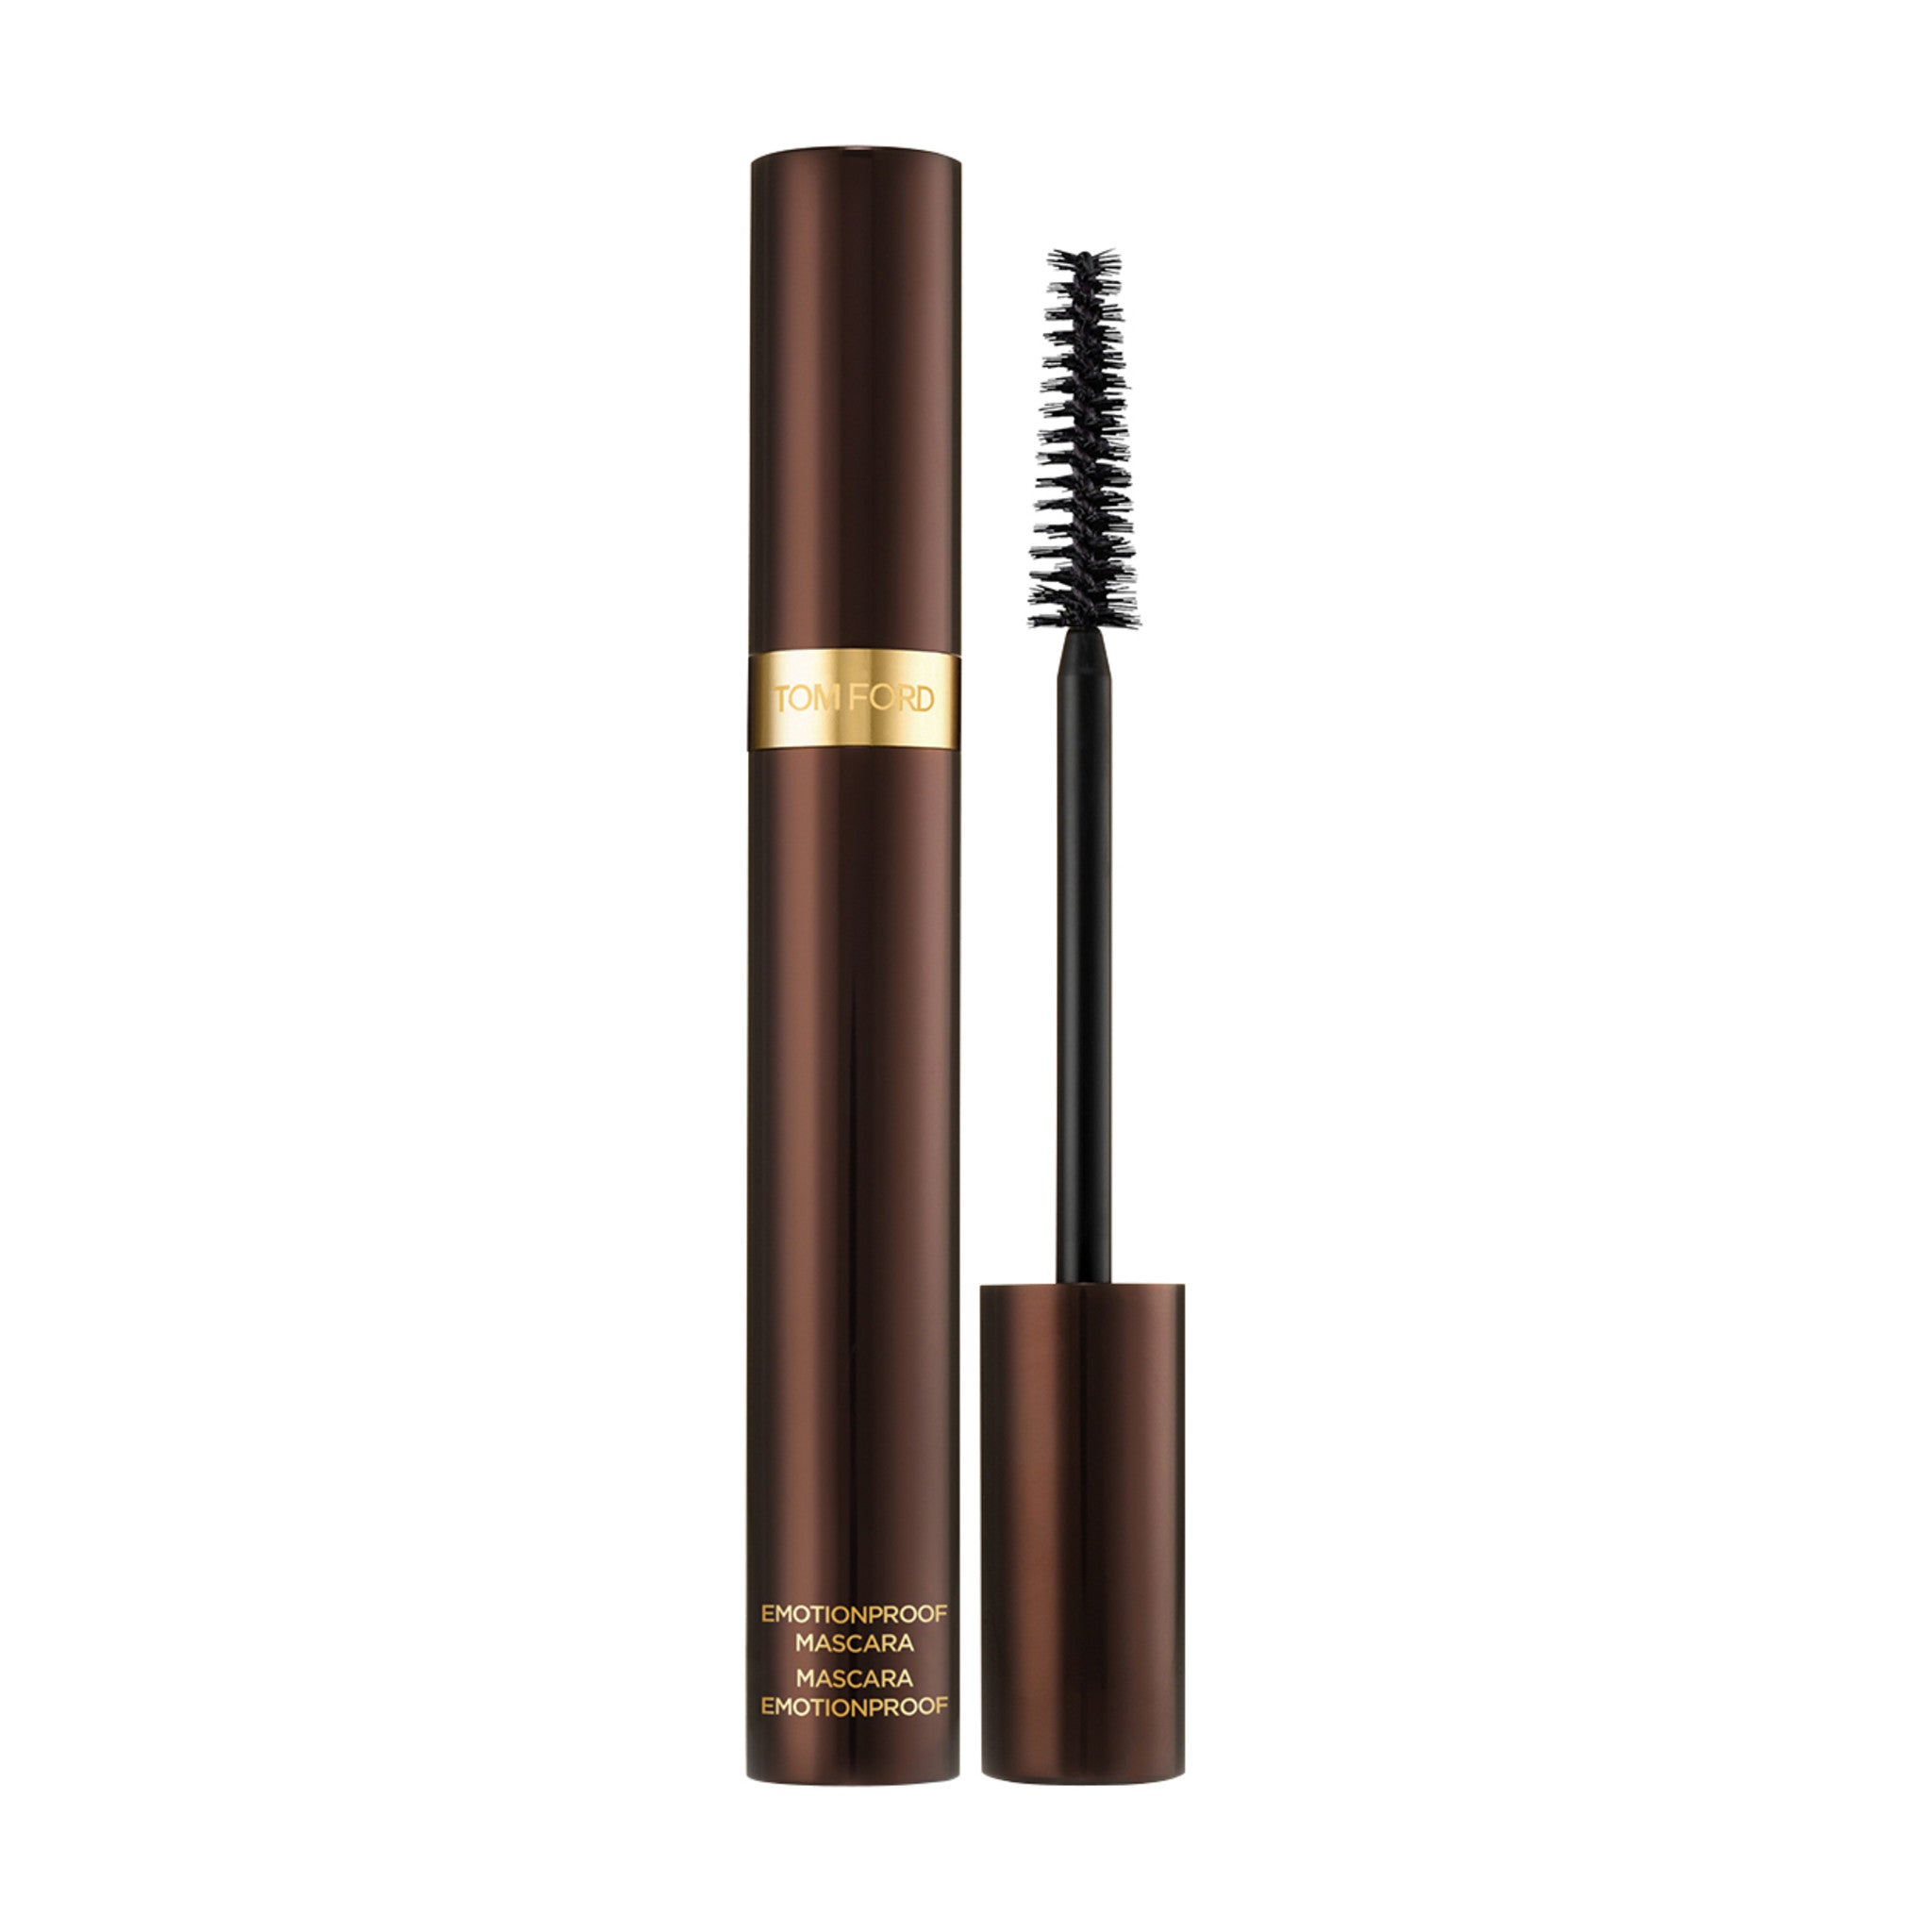 Tom Ford Emotionproof Mascara main image. This product is in the color black